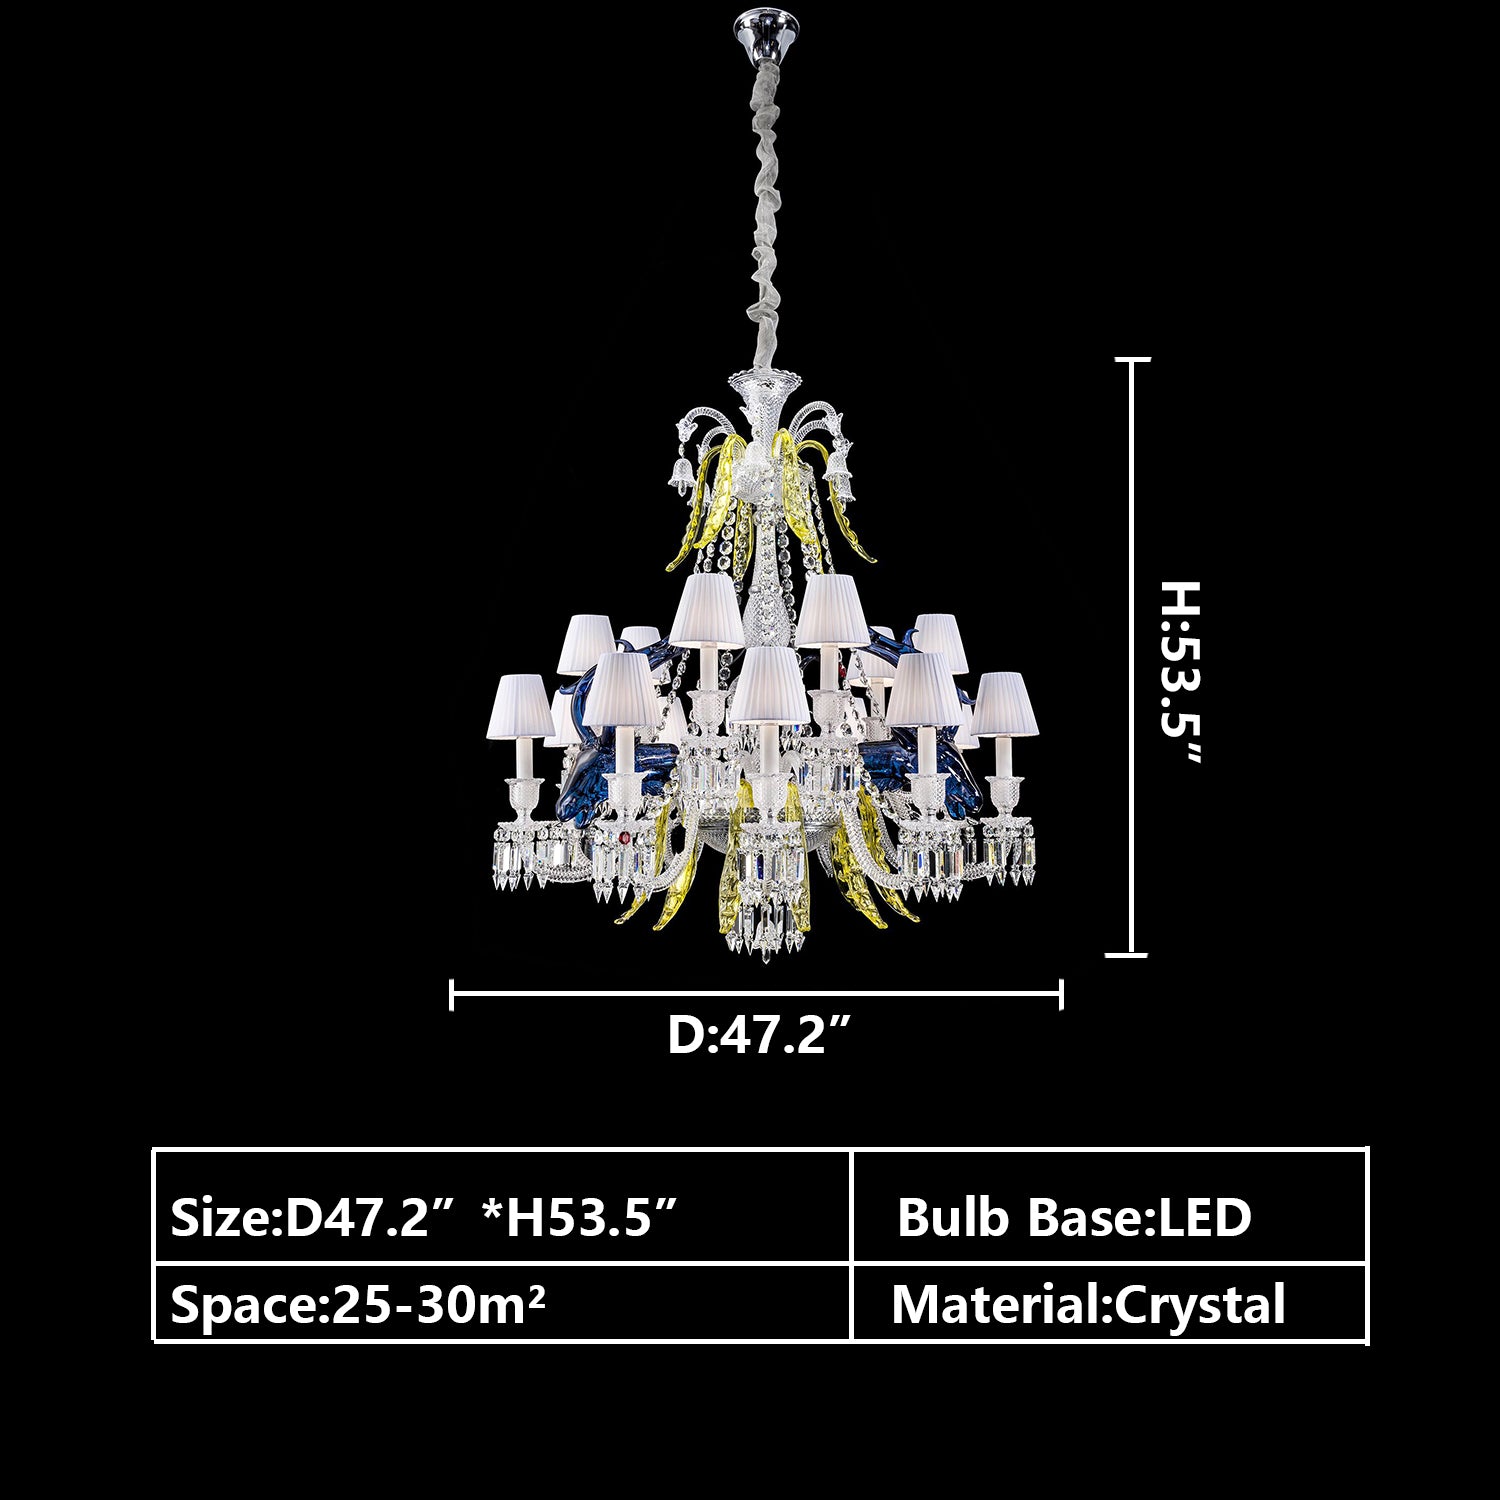 D47.2"*H53.5" chandelier,chandeliers,pendant,crystal,metal,glass,colorful,stained,yellow,blue,candle,glass shade,red,oversized,large,huge,big,luxury,living room,dining room,foyer,entrys,hallway,loft,stairs